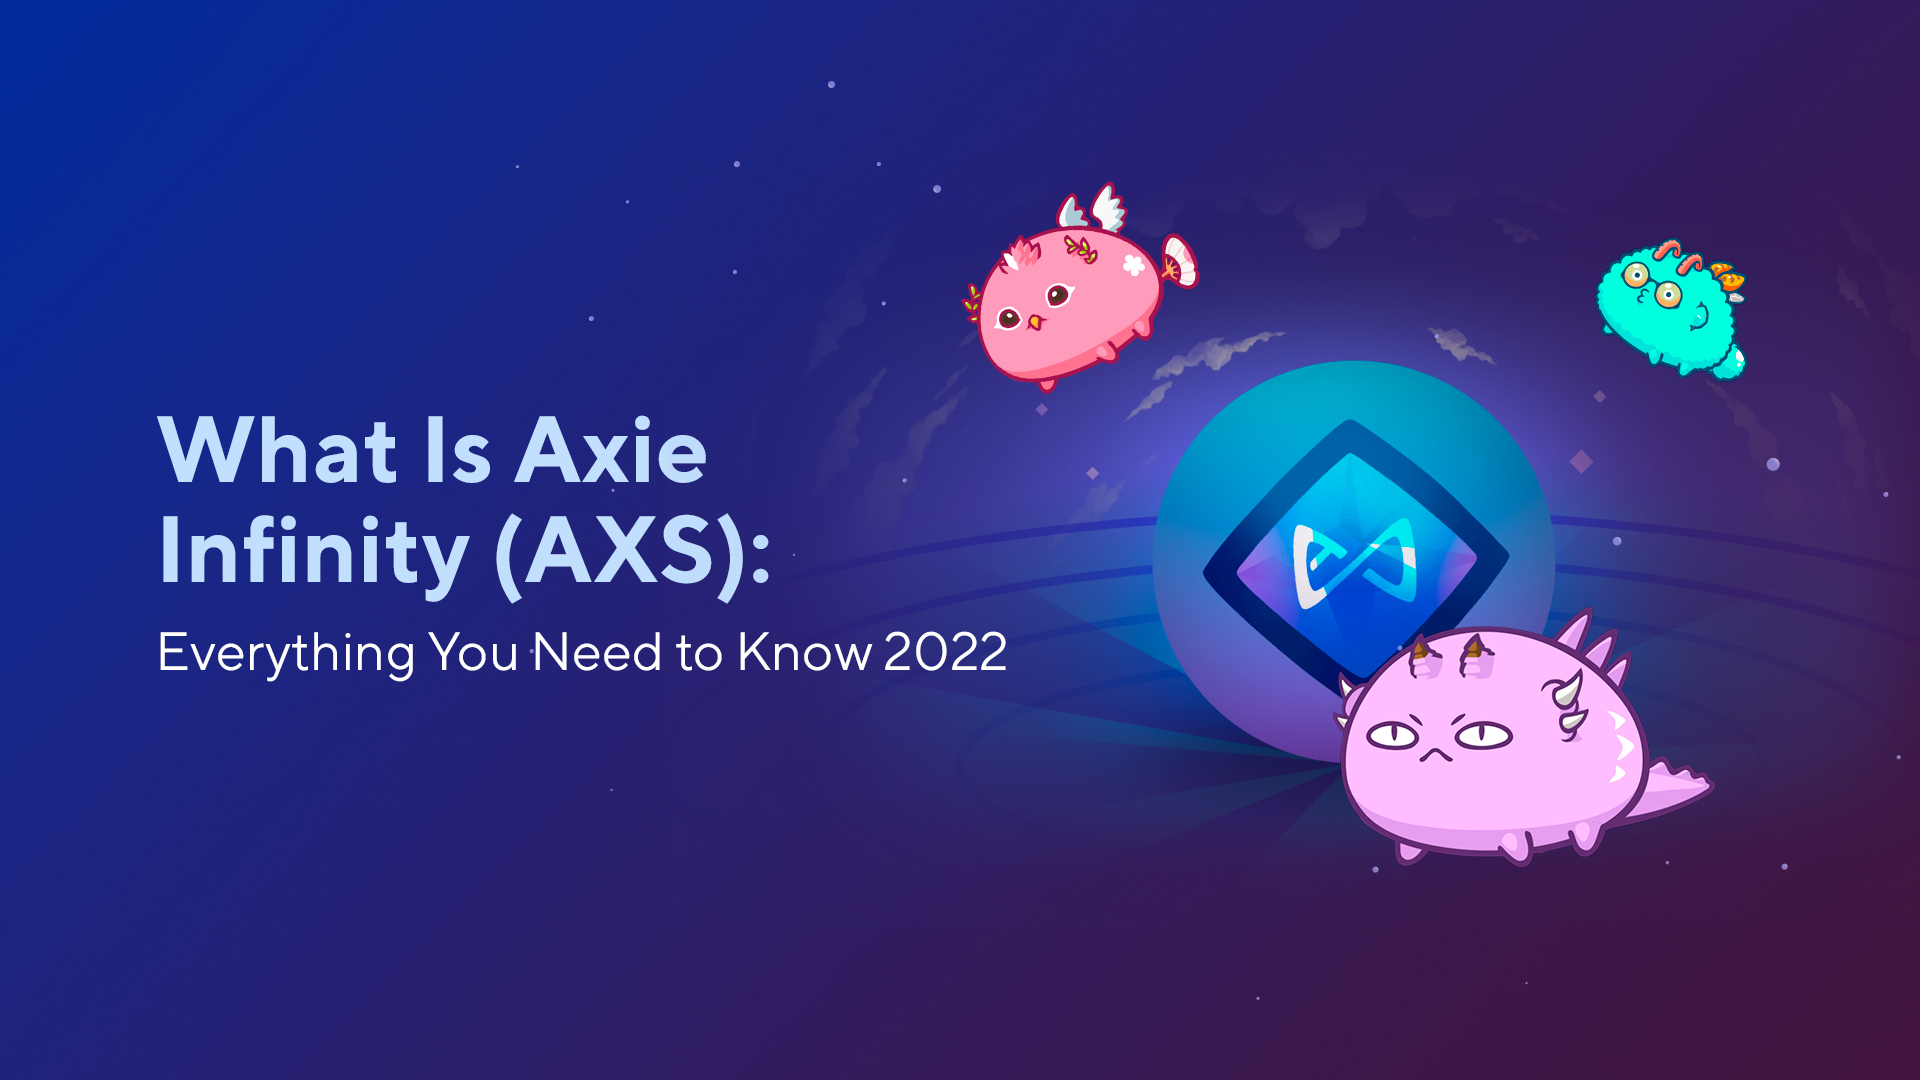 What Is Axie Infinity (AXS): Everything You Need to Know 2022